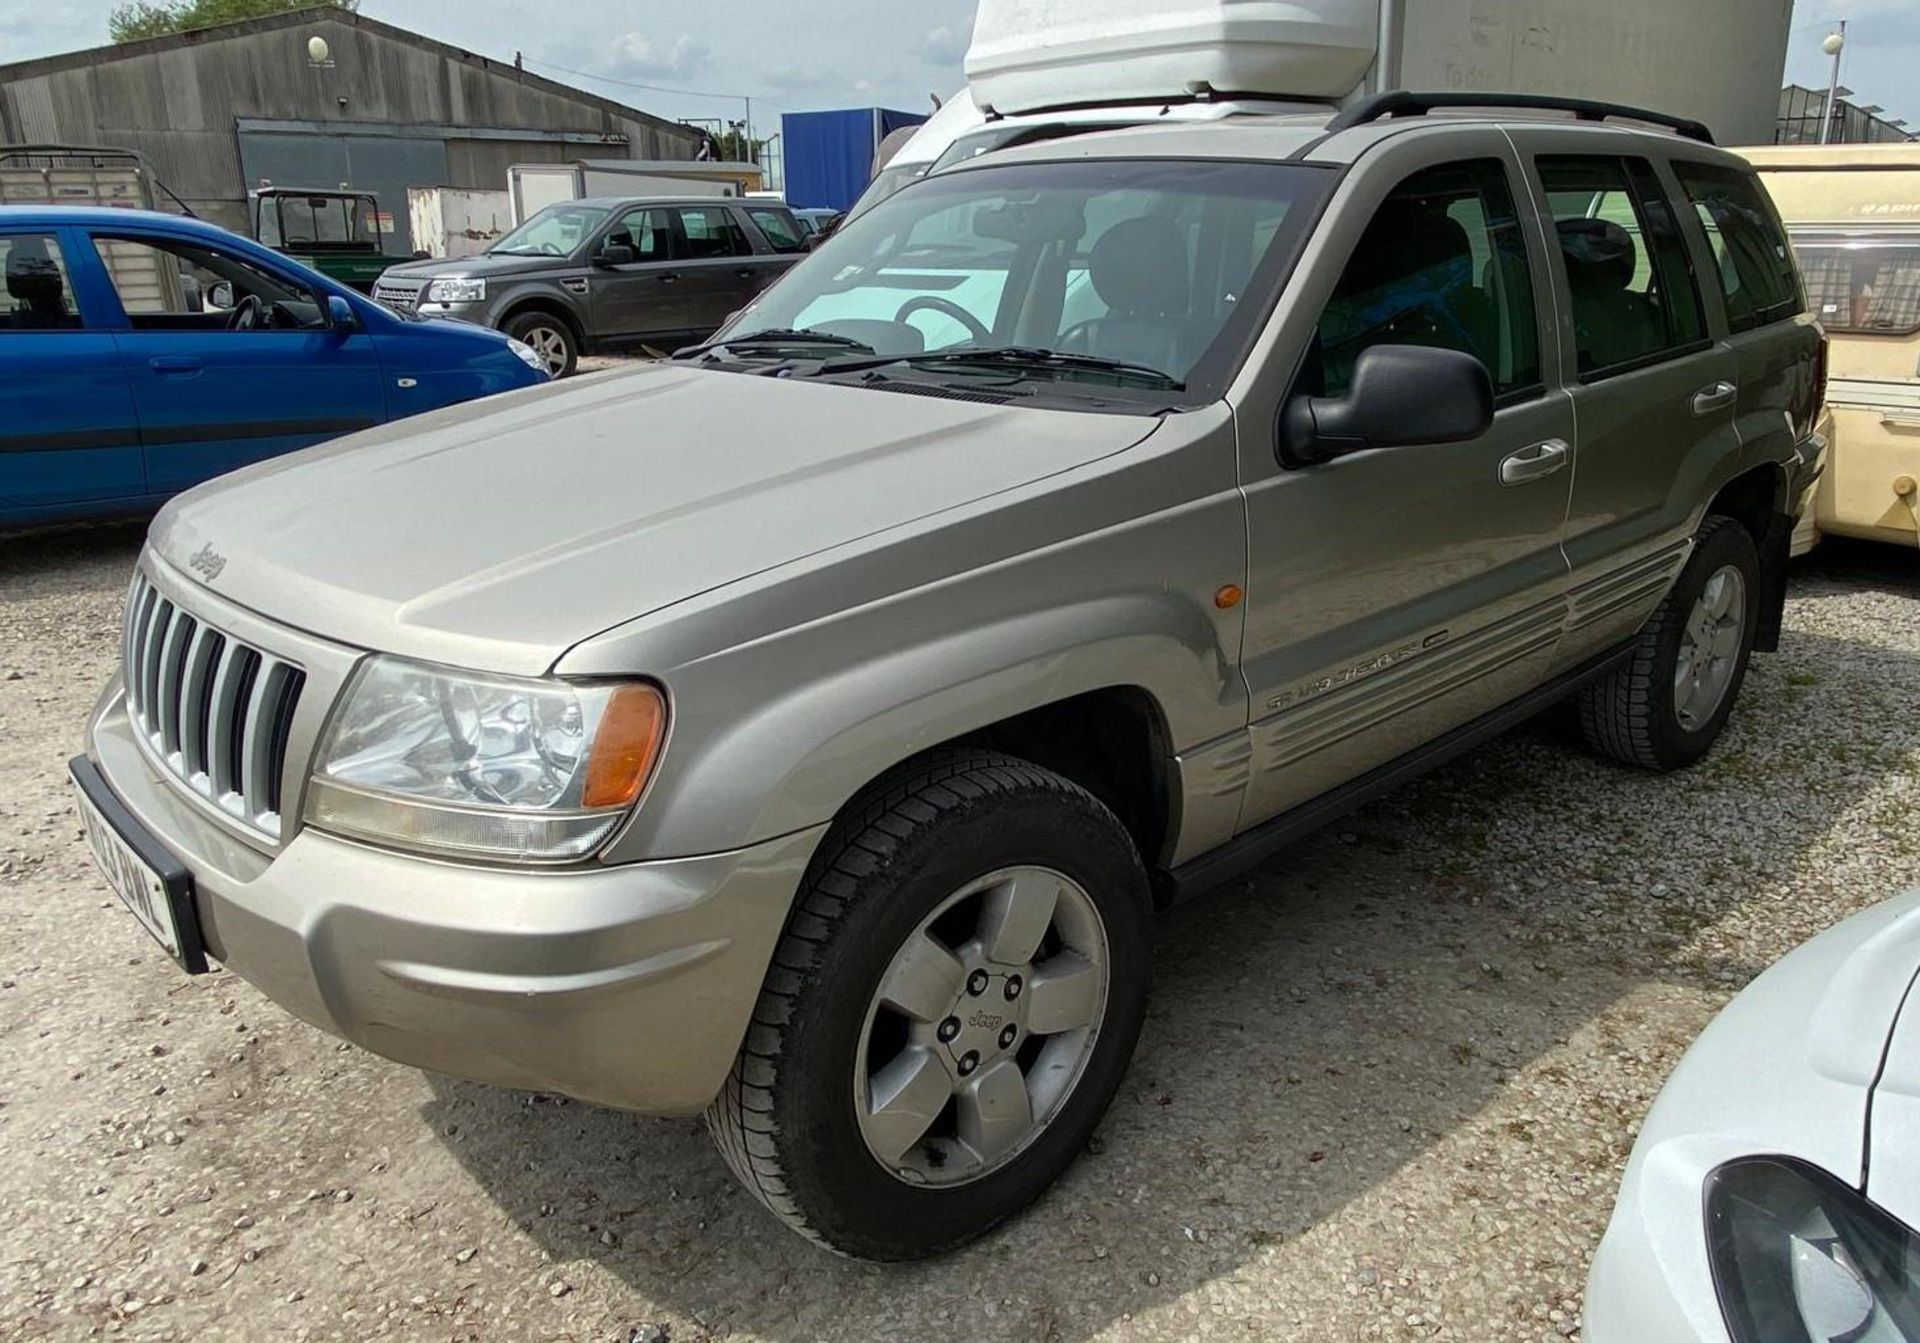 JEEP GRAND CREROKEE CRD KW03BWL 86000 MILES MOT 17/05/25 LAST SERVICE AT 79000 MILES 16 STAMPS IN - Image 2 of 3